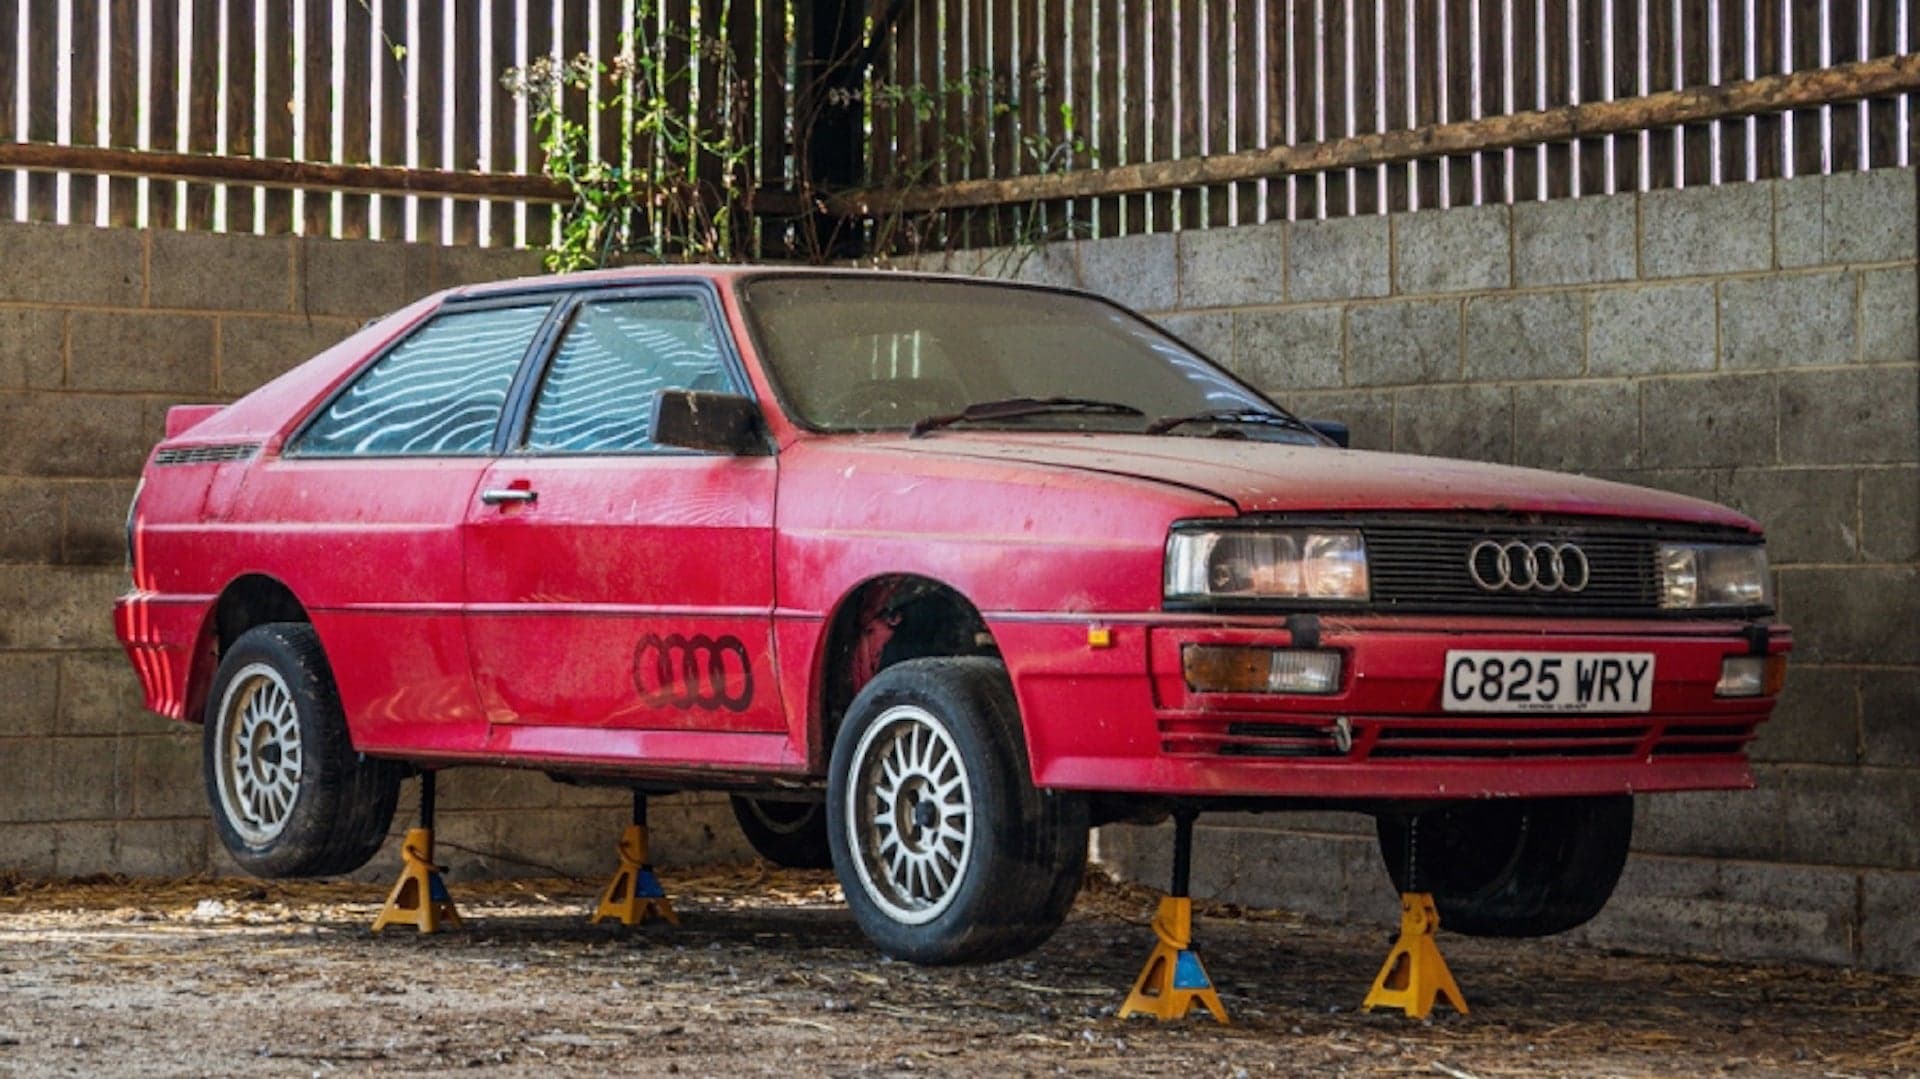 This 1985 Audi Quattro Barn Find Is Your Chance to Get in Cheap and Hit It Big